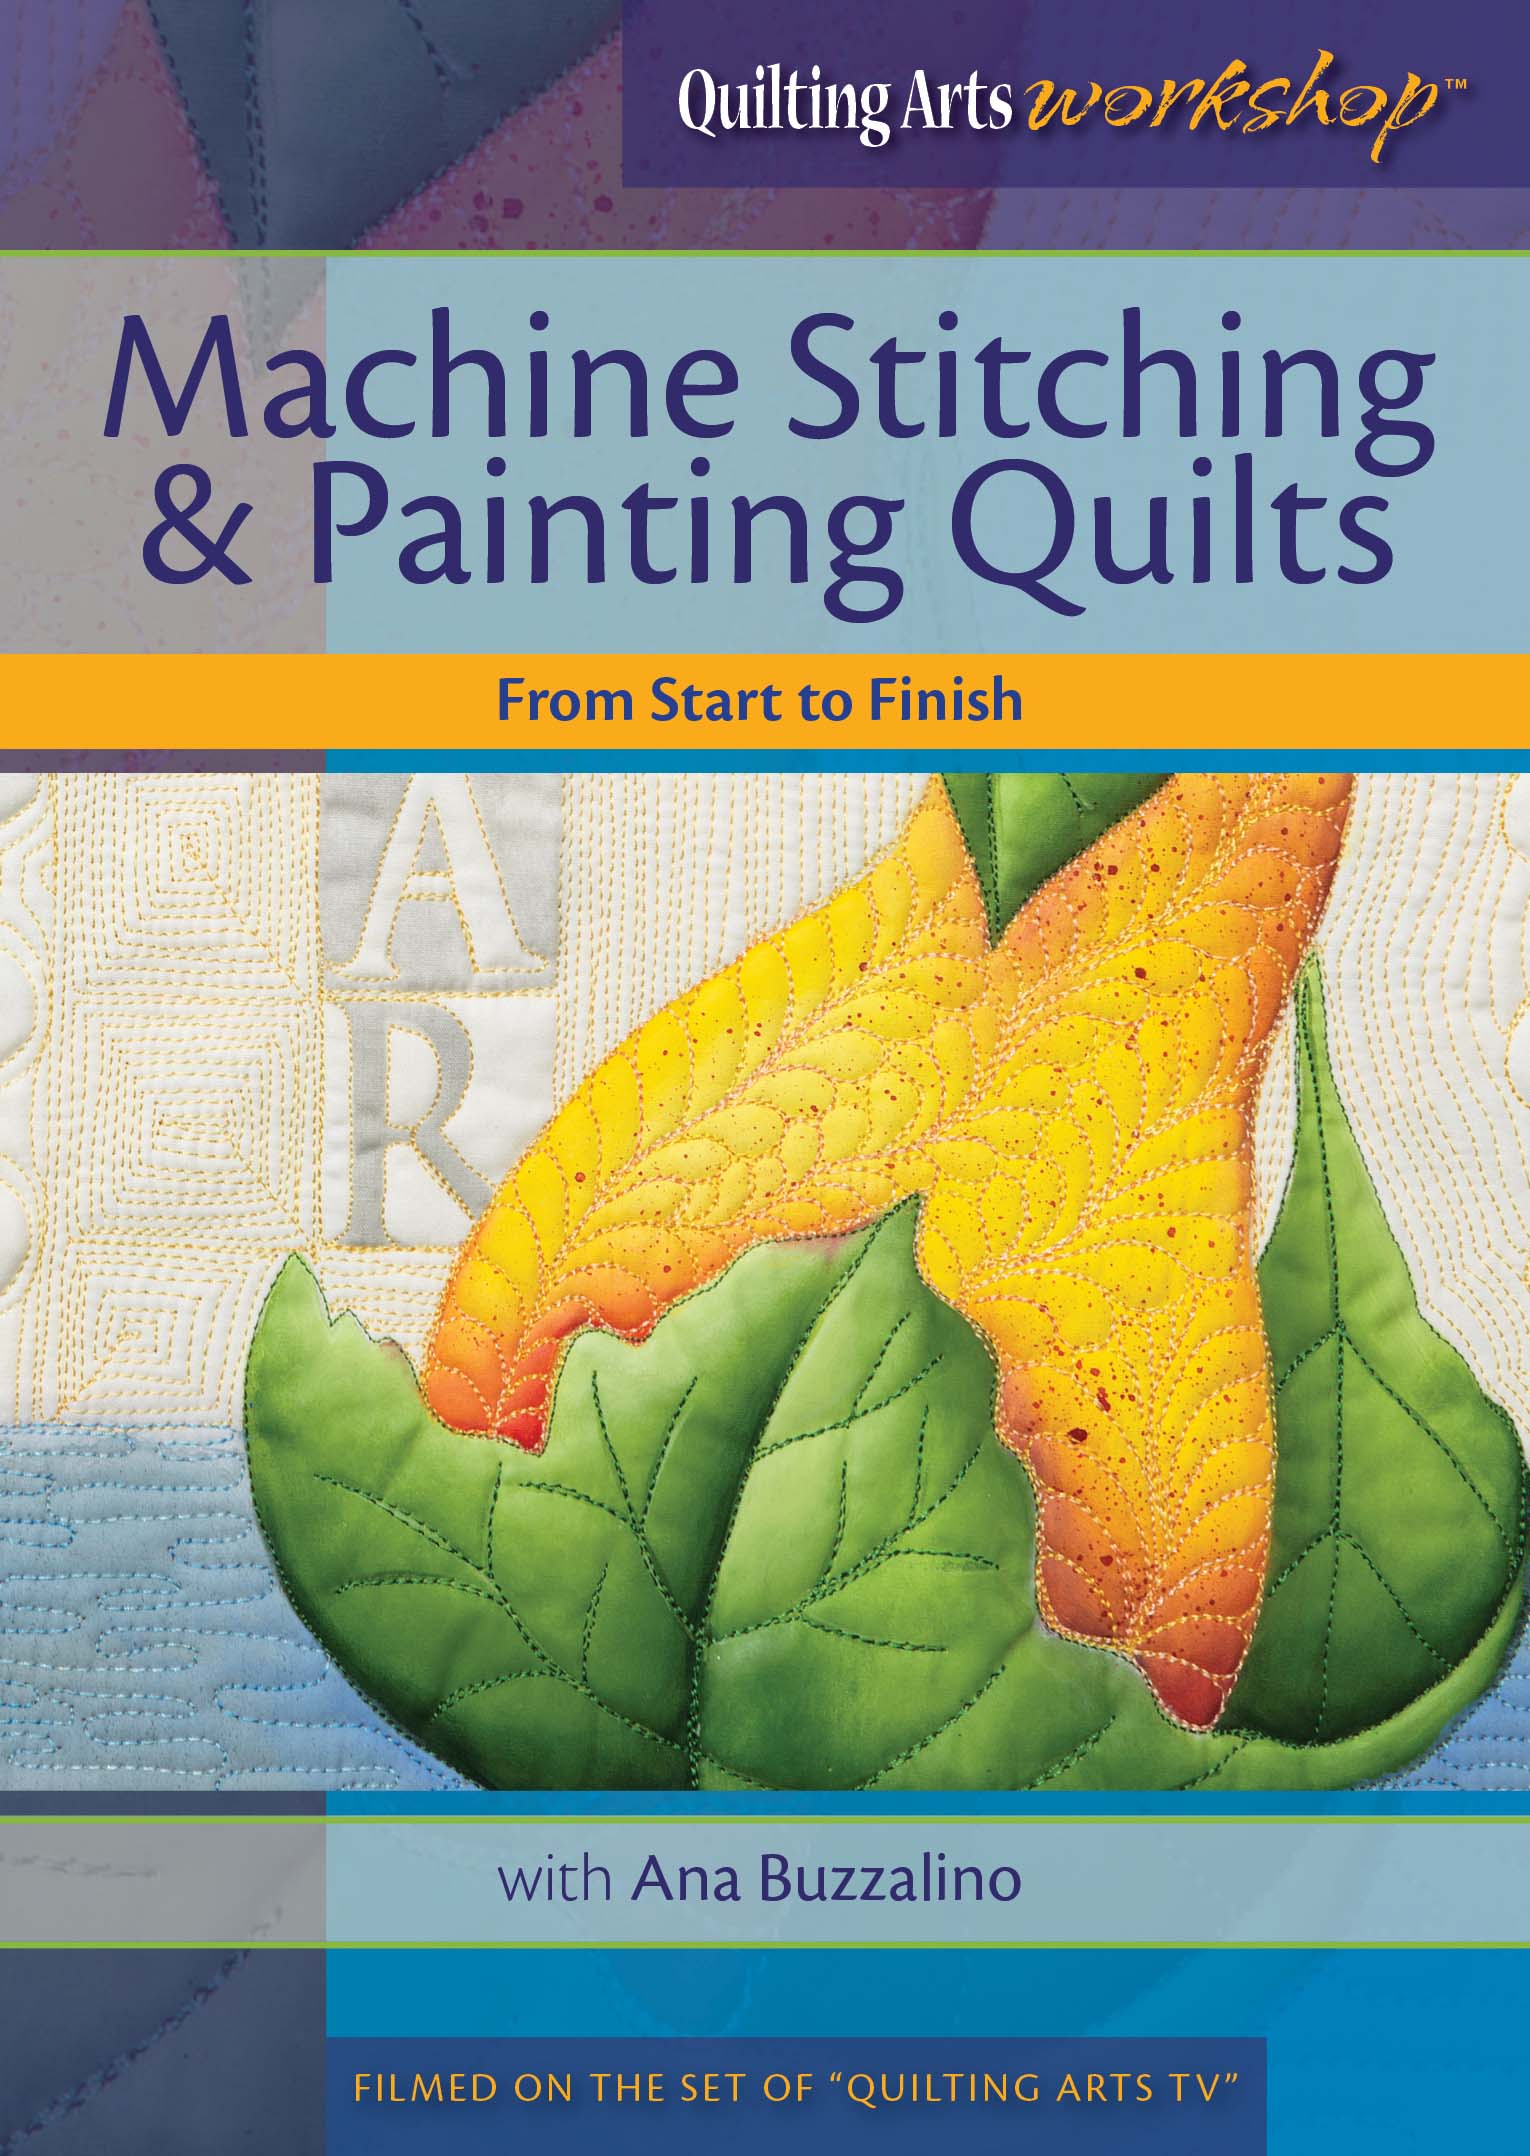 Quilting Arts Workshop DVD available soon